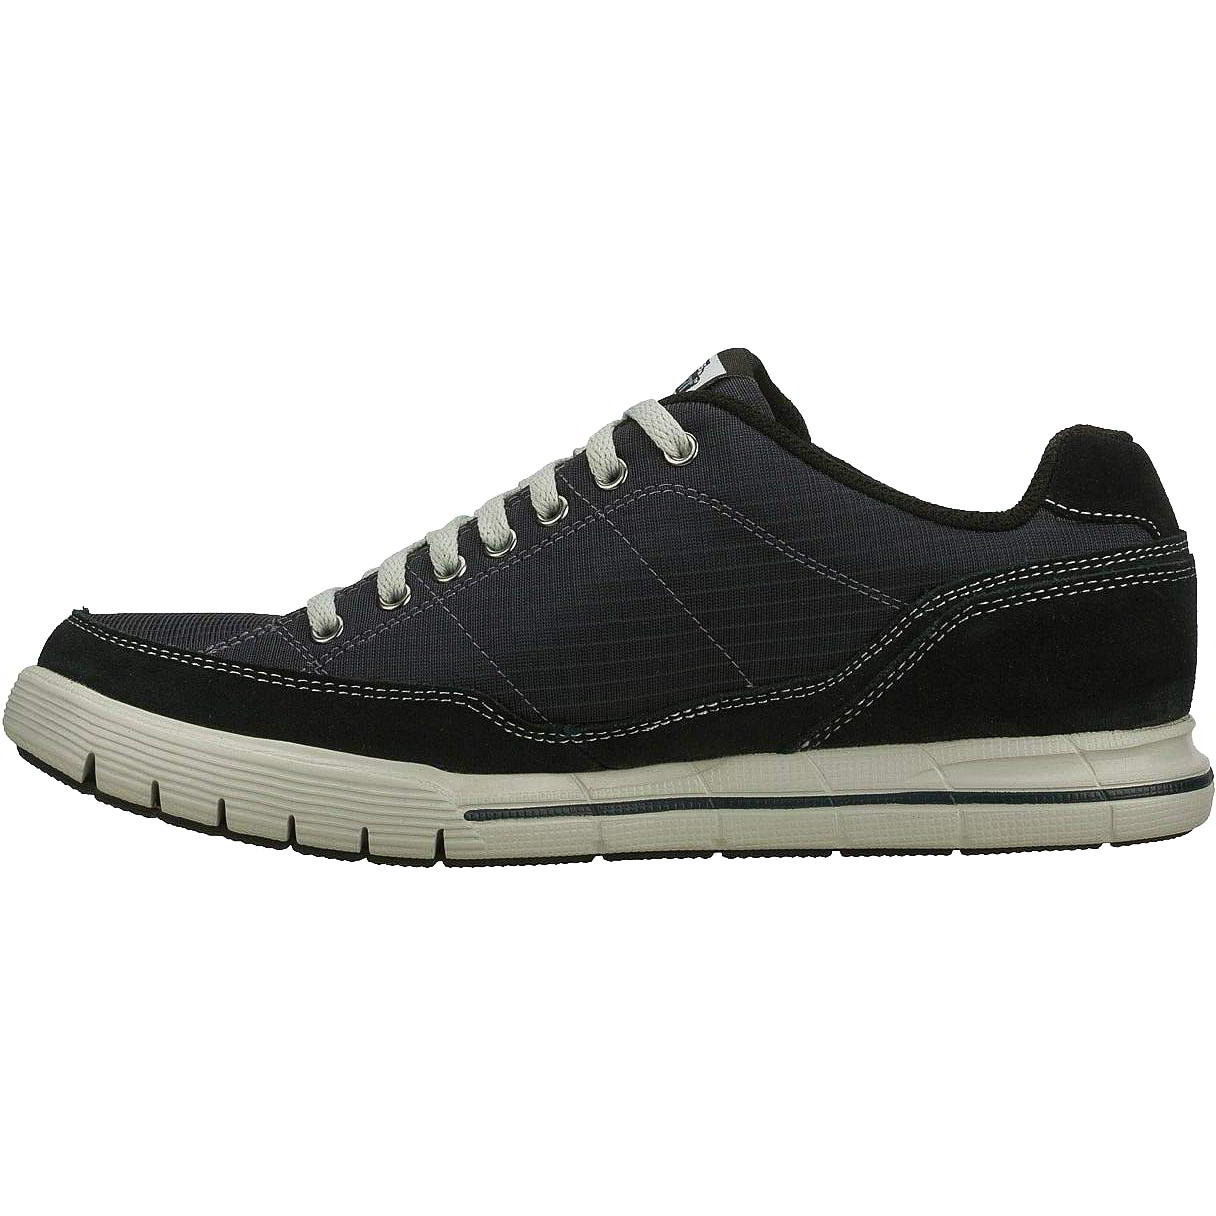 Descenso repentino pedir Mecánica Skechers Mens Arcaded II Circulate Trainers - Navy Black from Skechers ::  Buy from Mastershoe Myshu on The UK High Street